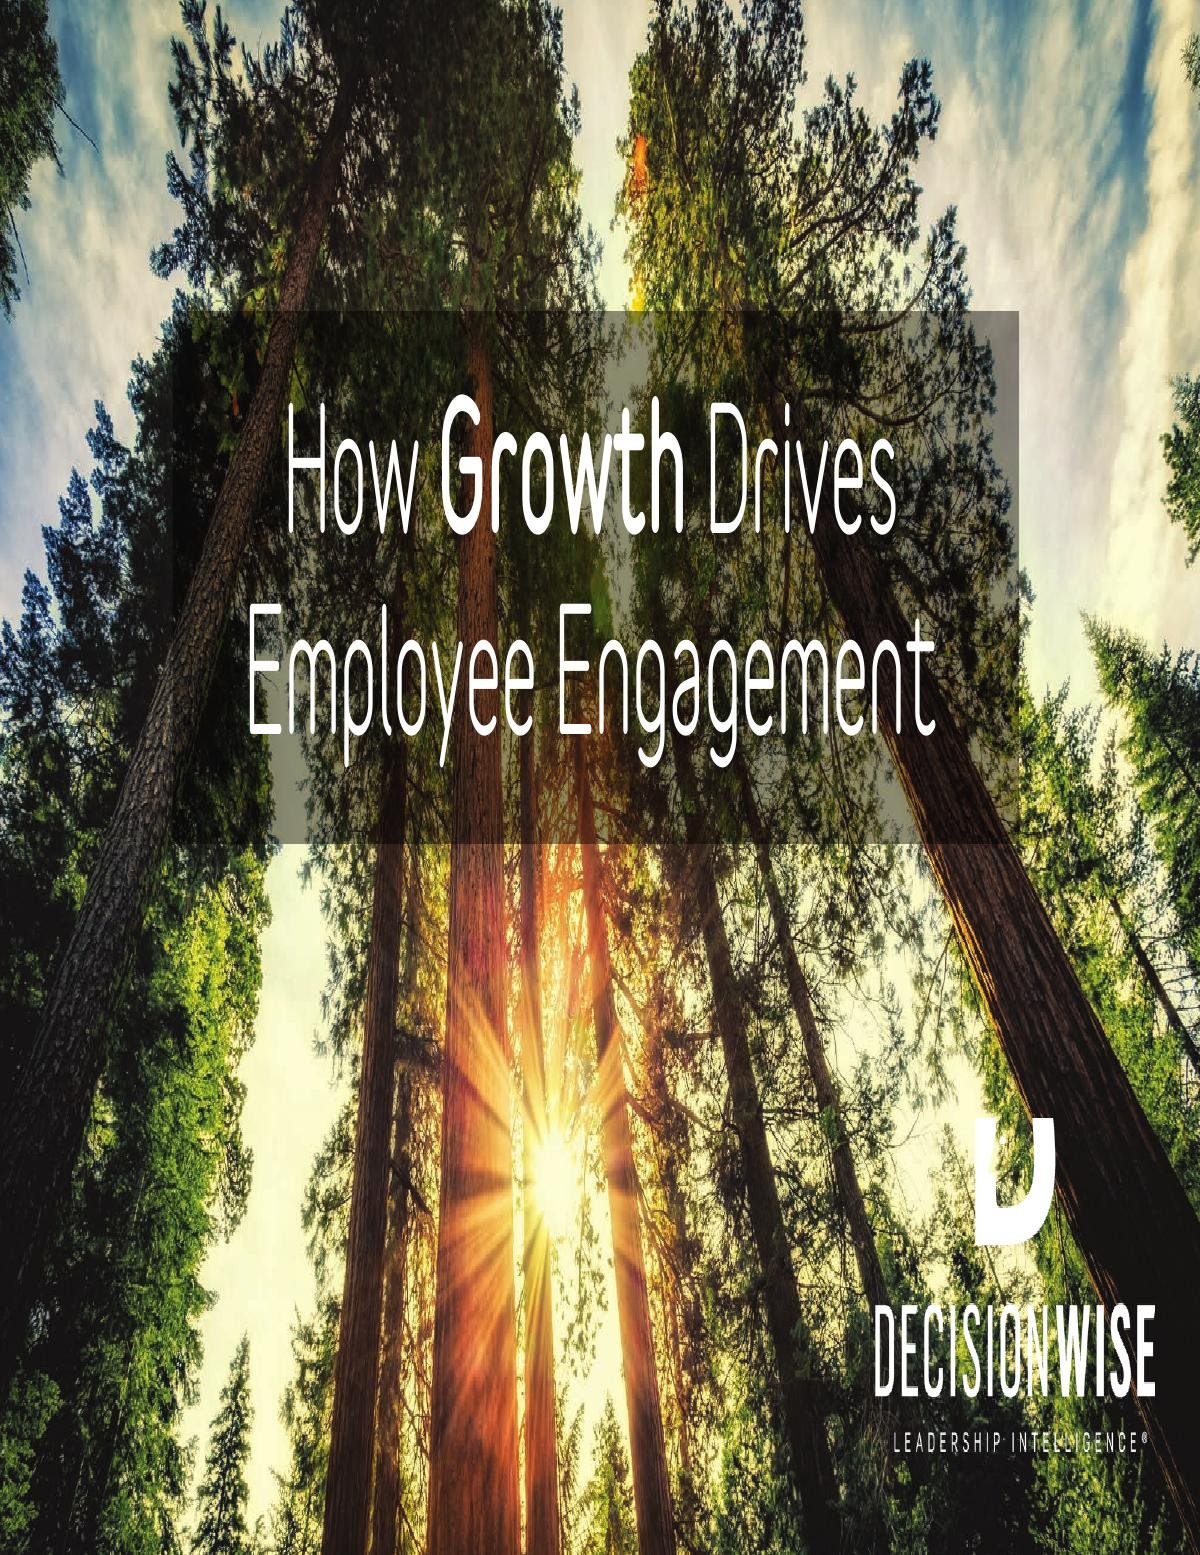 How Growth Drives Employee Engagement